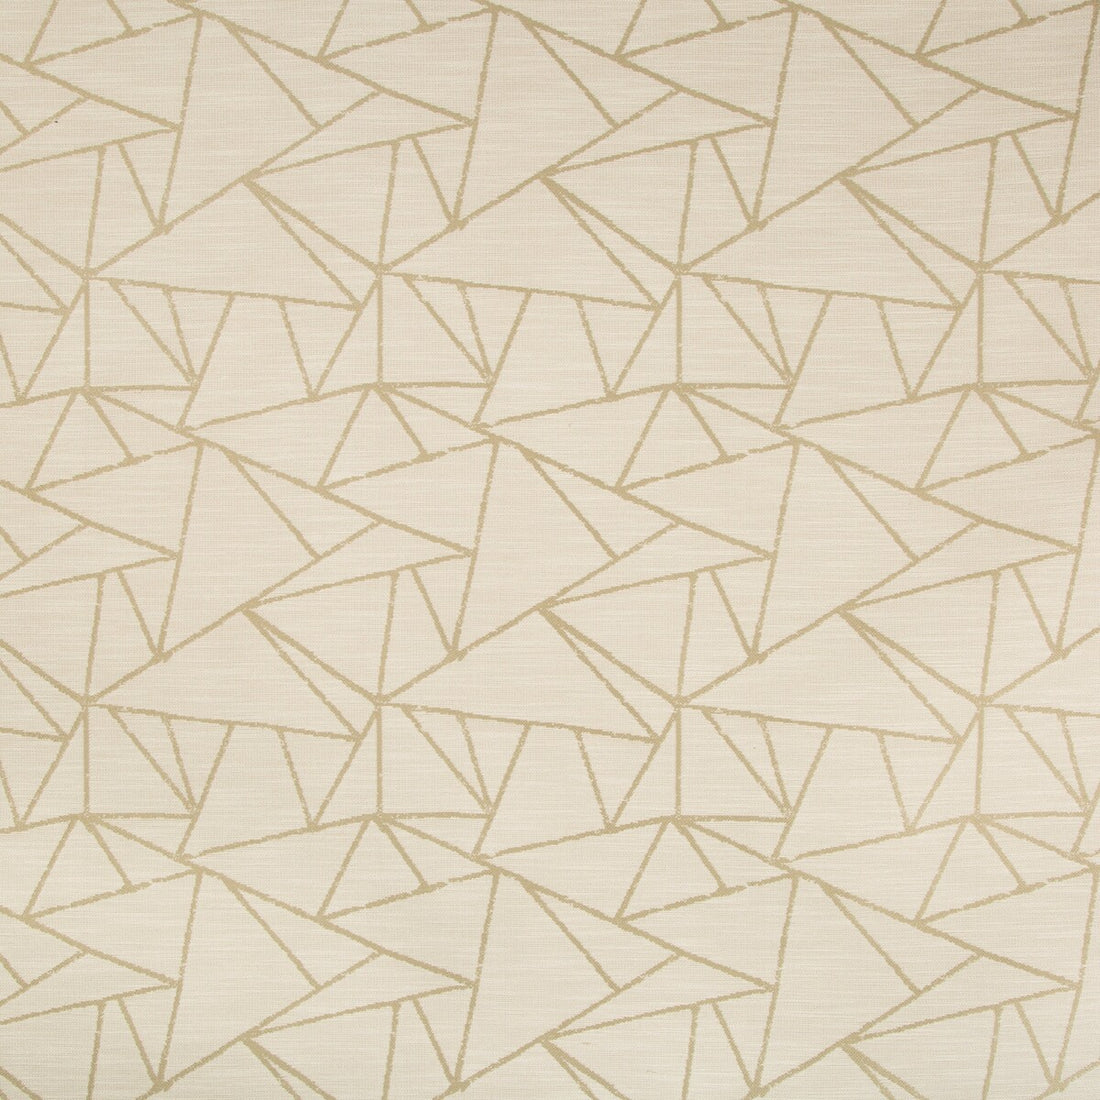 Kravet Contract fabric in 35019-16 color - pattern 35019.16.0 - by Kravet Contract in the Incase Crypton Gis collection